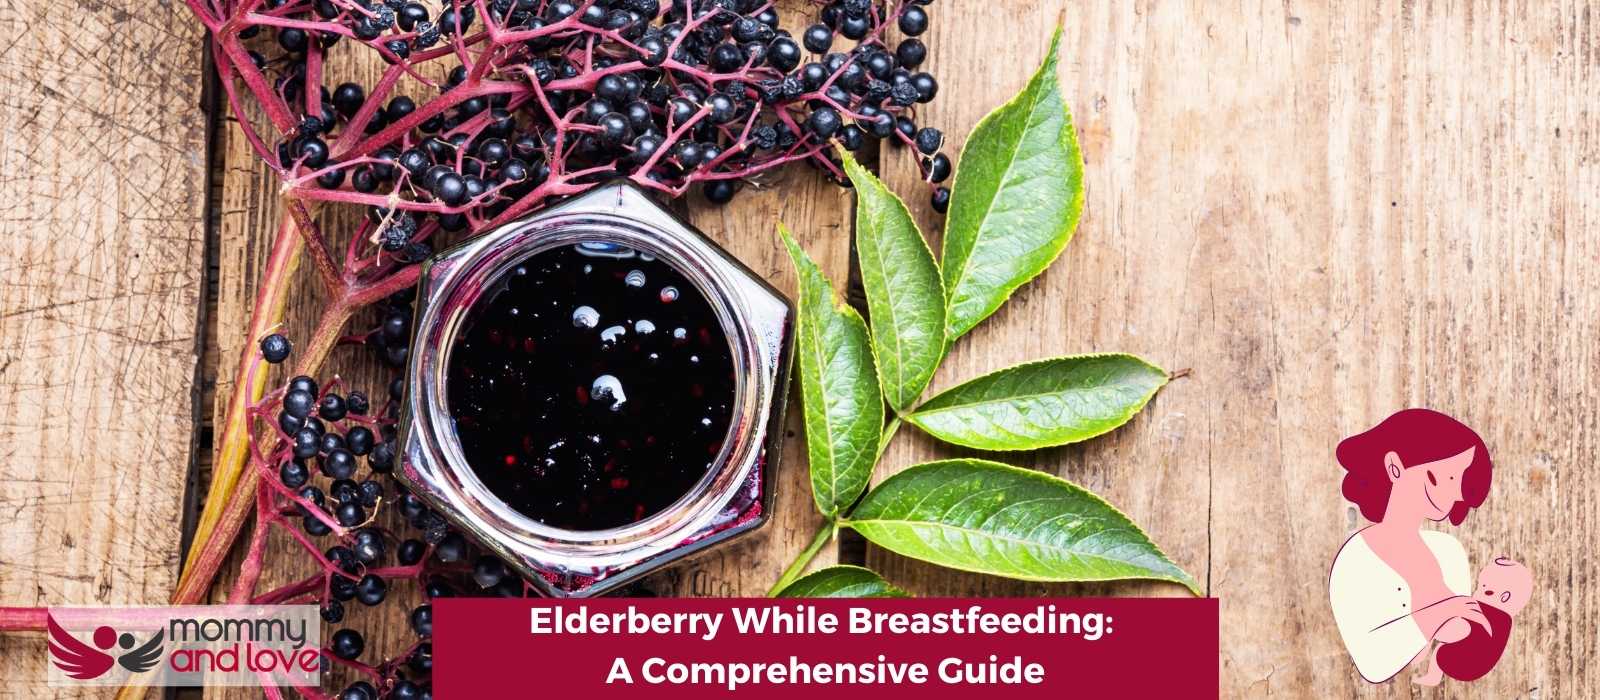 Elderberry While Breastfeeding A Comprehensive Guide